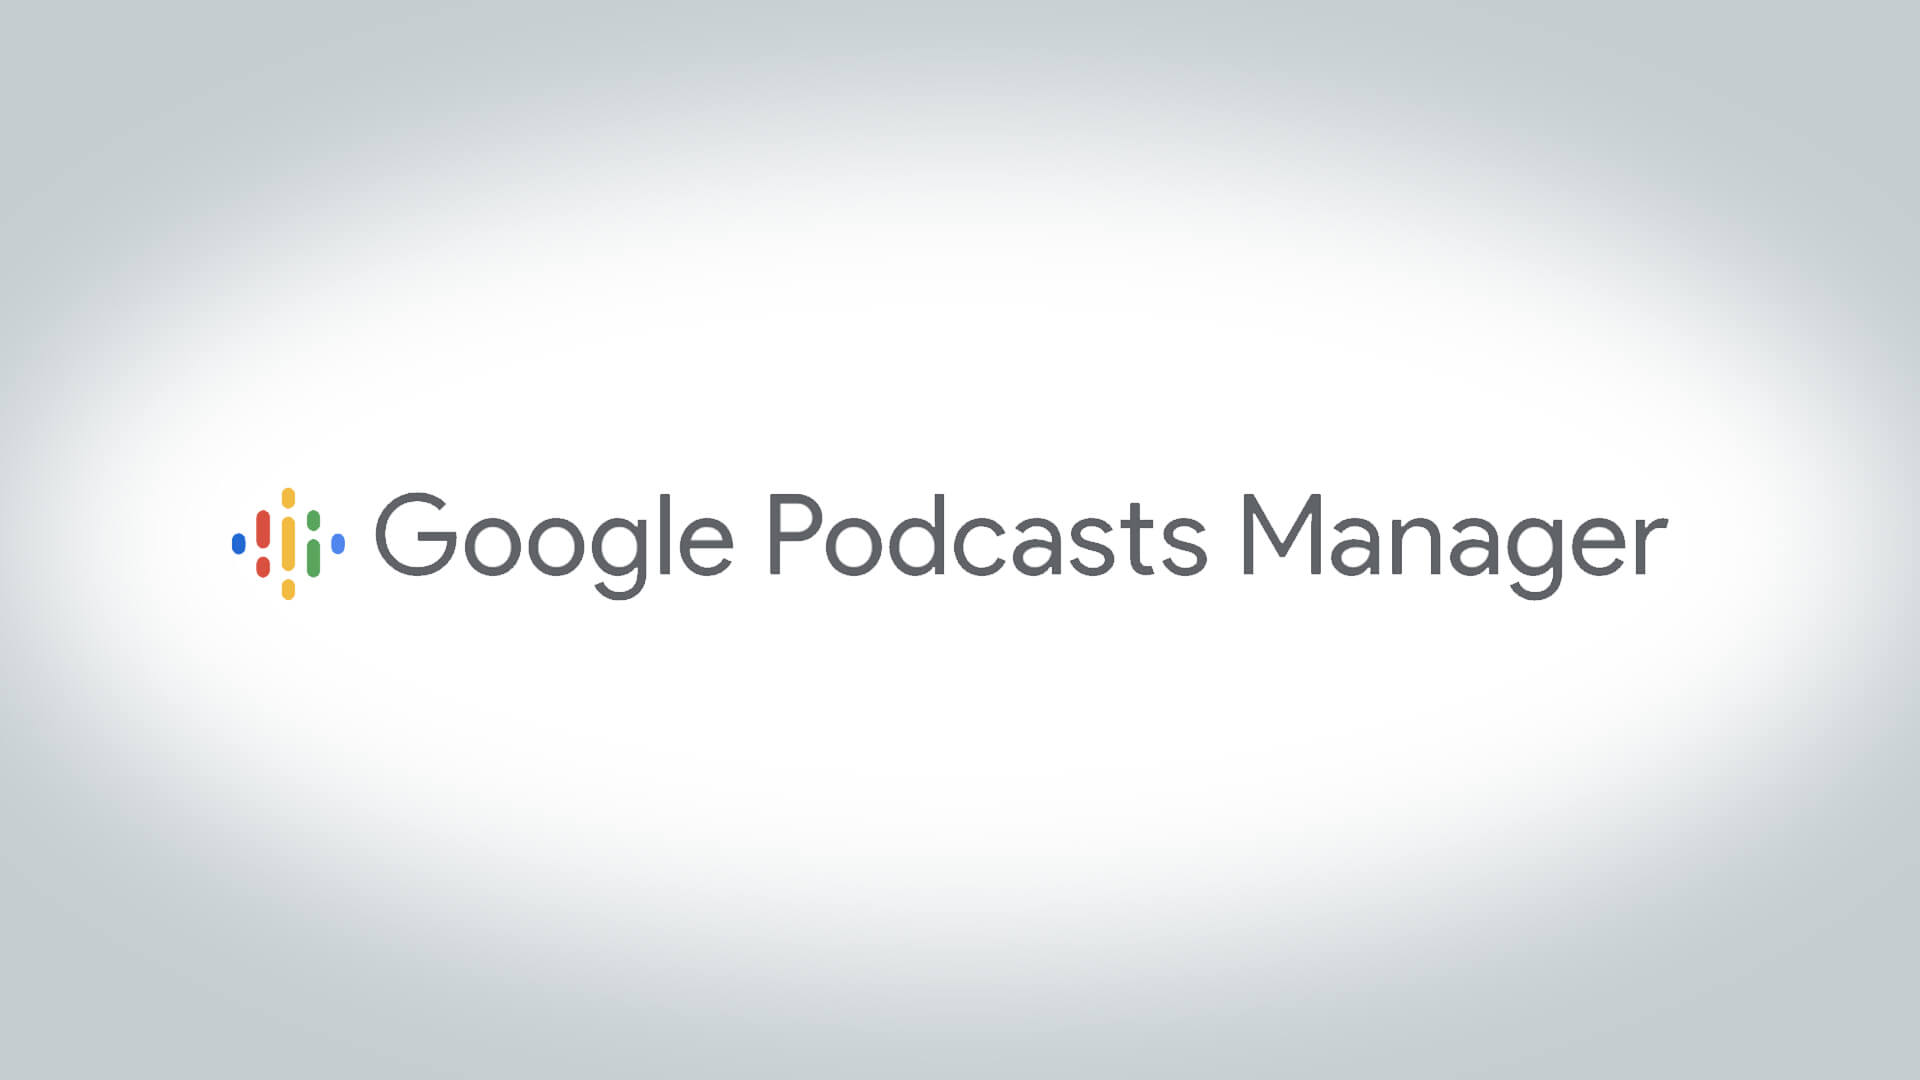 Google Introduces Google Podcasts Manager